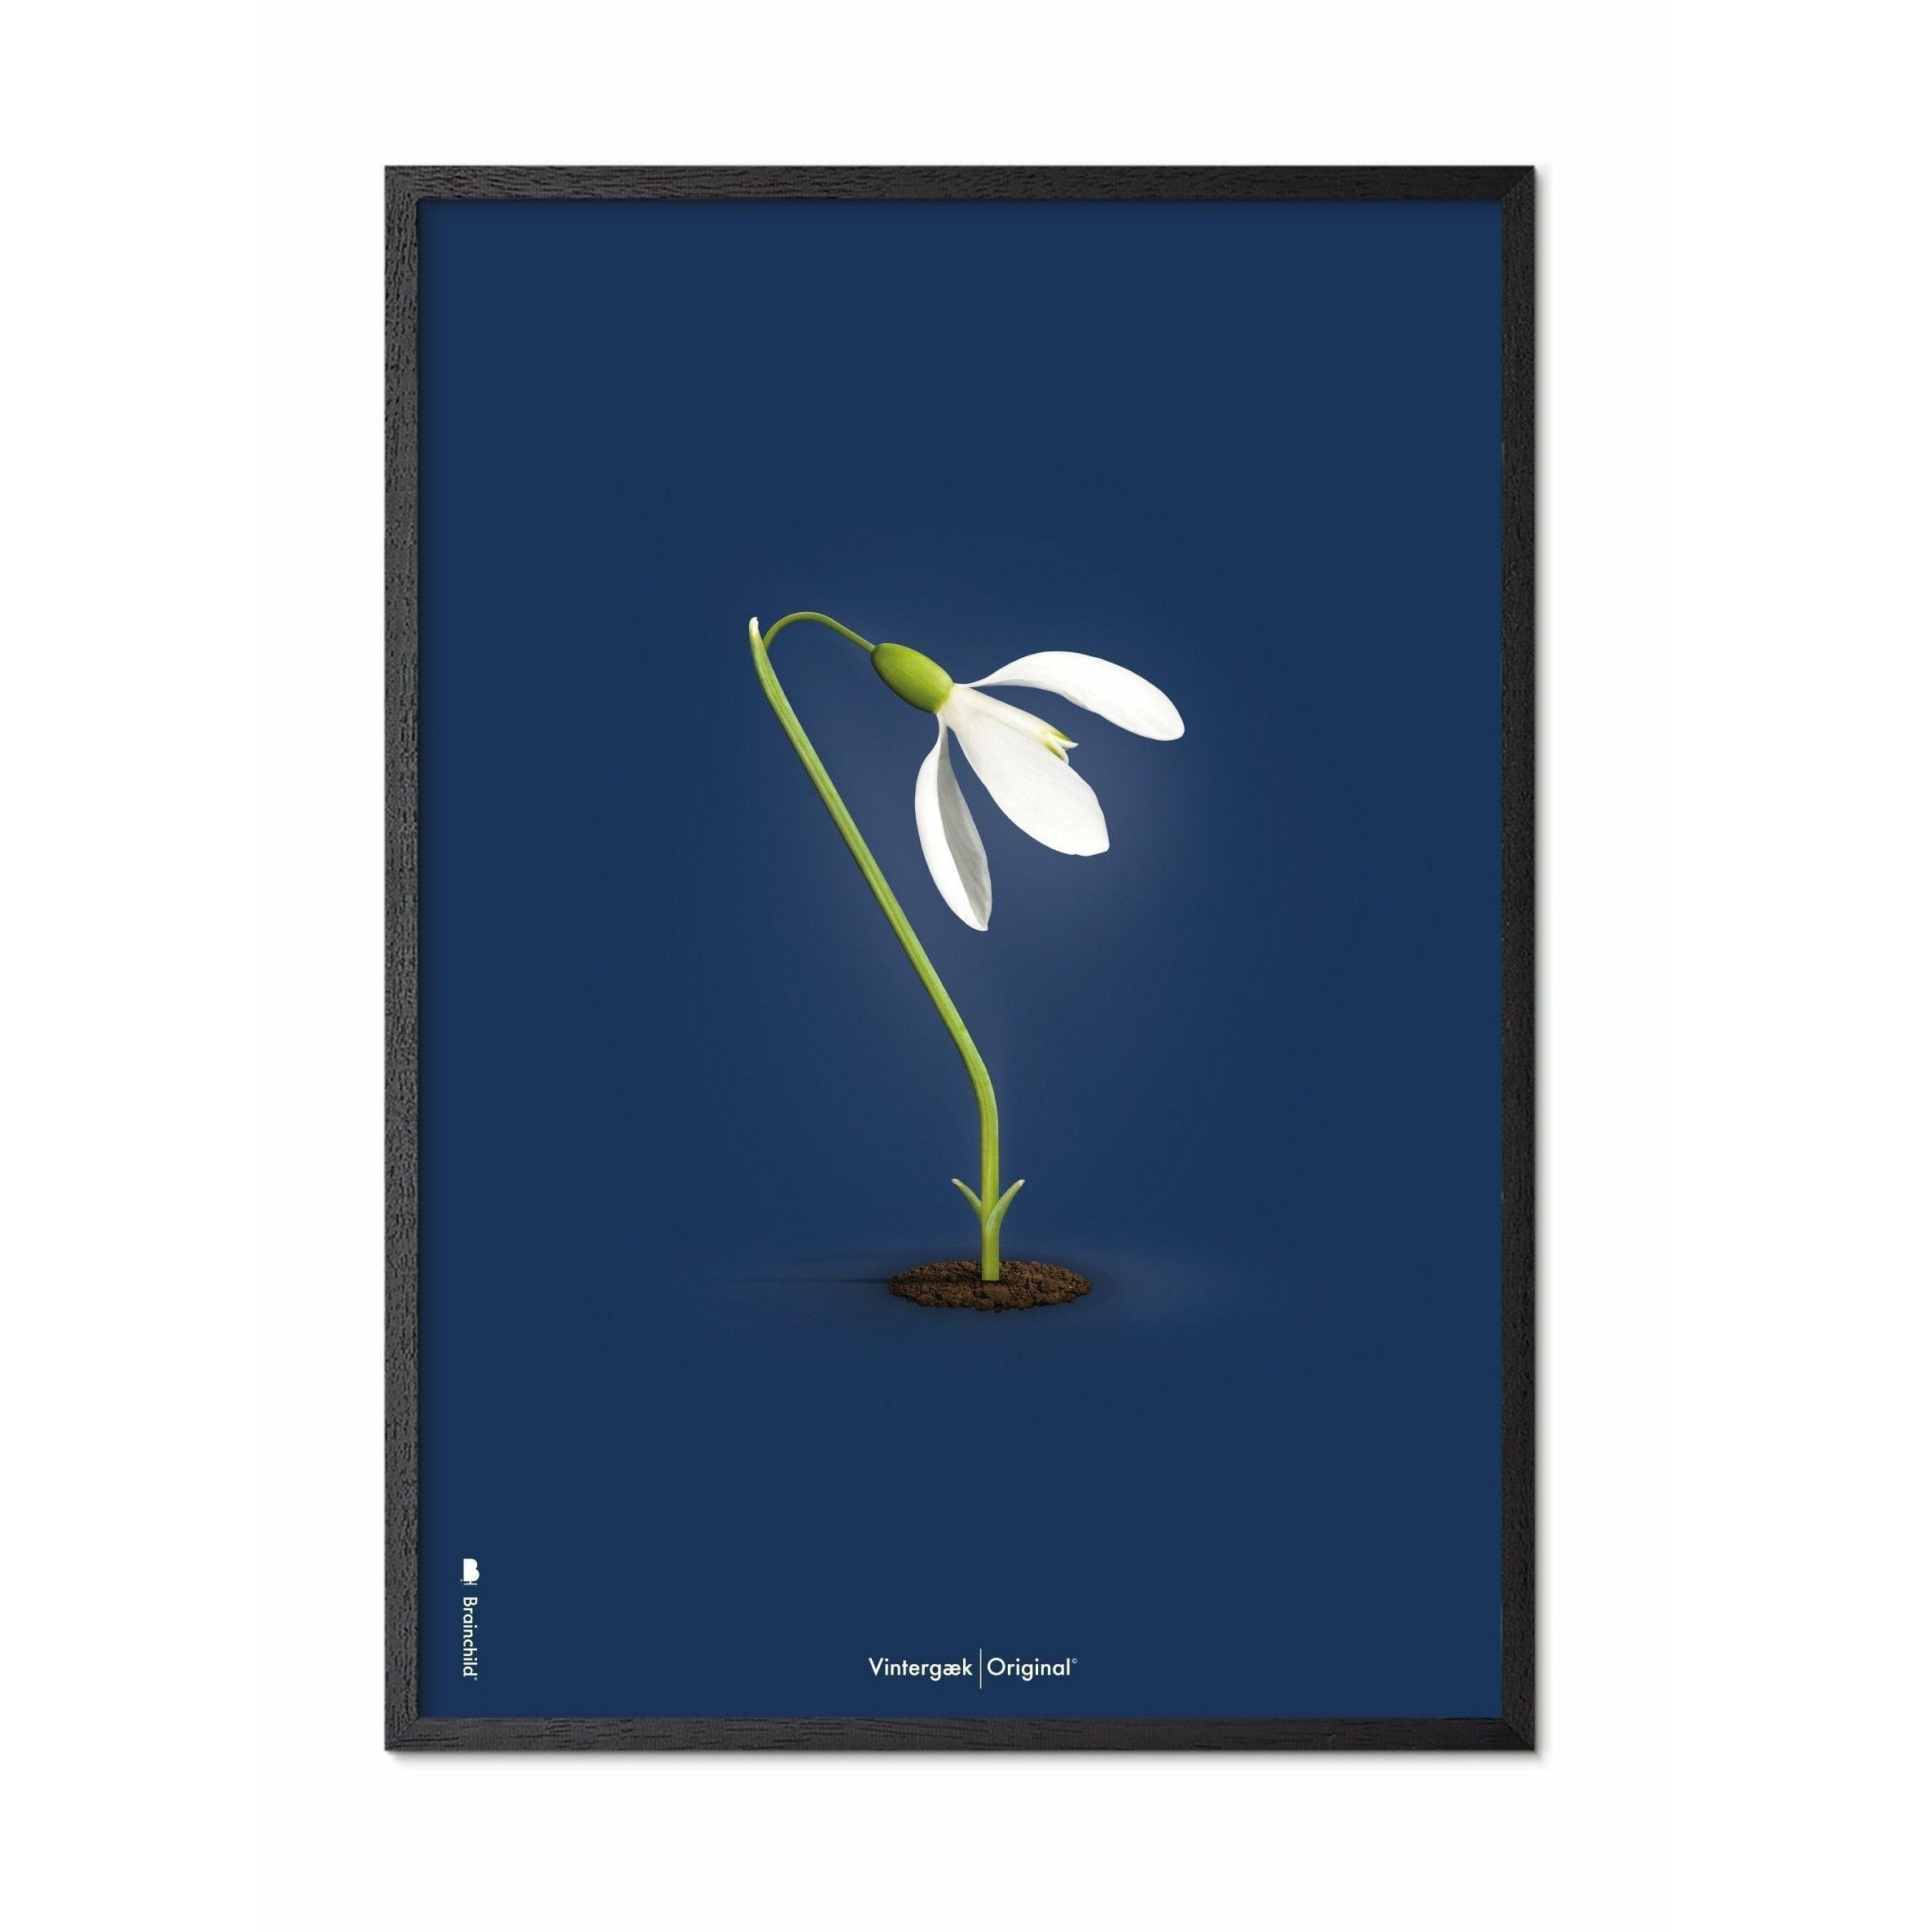 Brainchild Snowdrop Classic Poster, Frame Made Of Black Lacquered Wood 50x70 Cm, Dark Blue Background